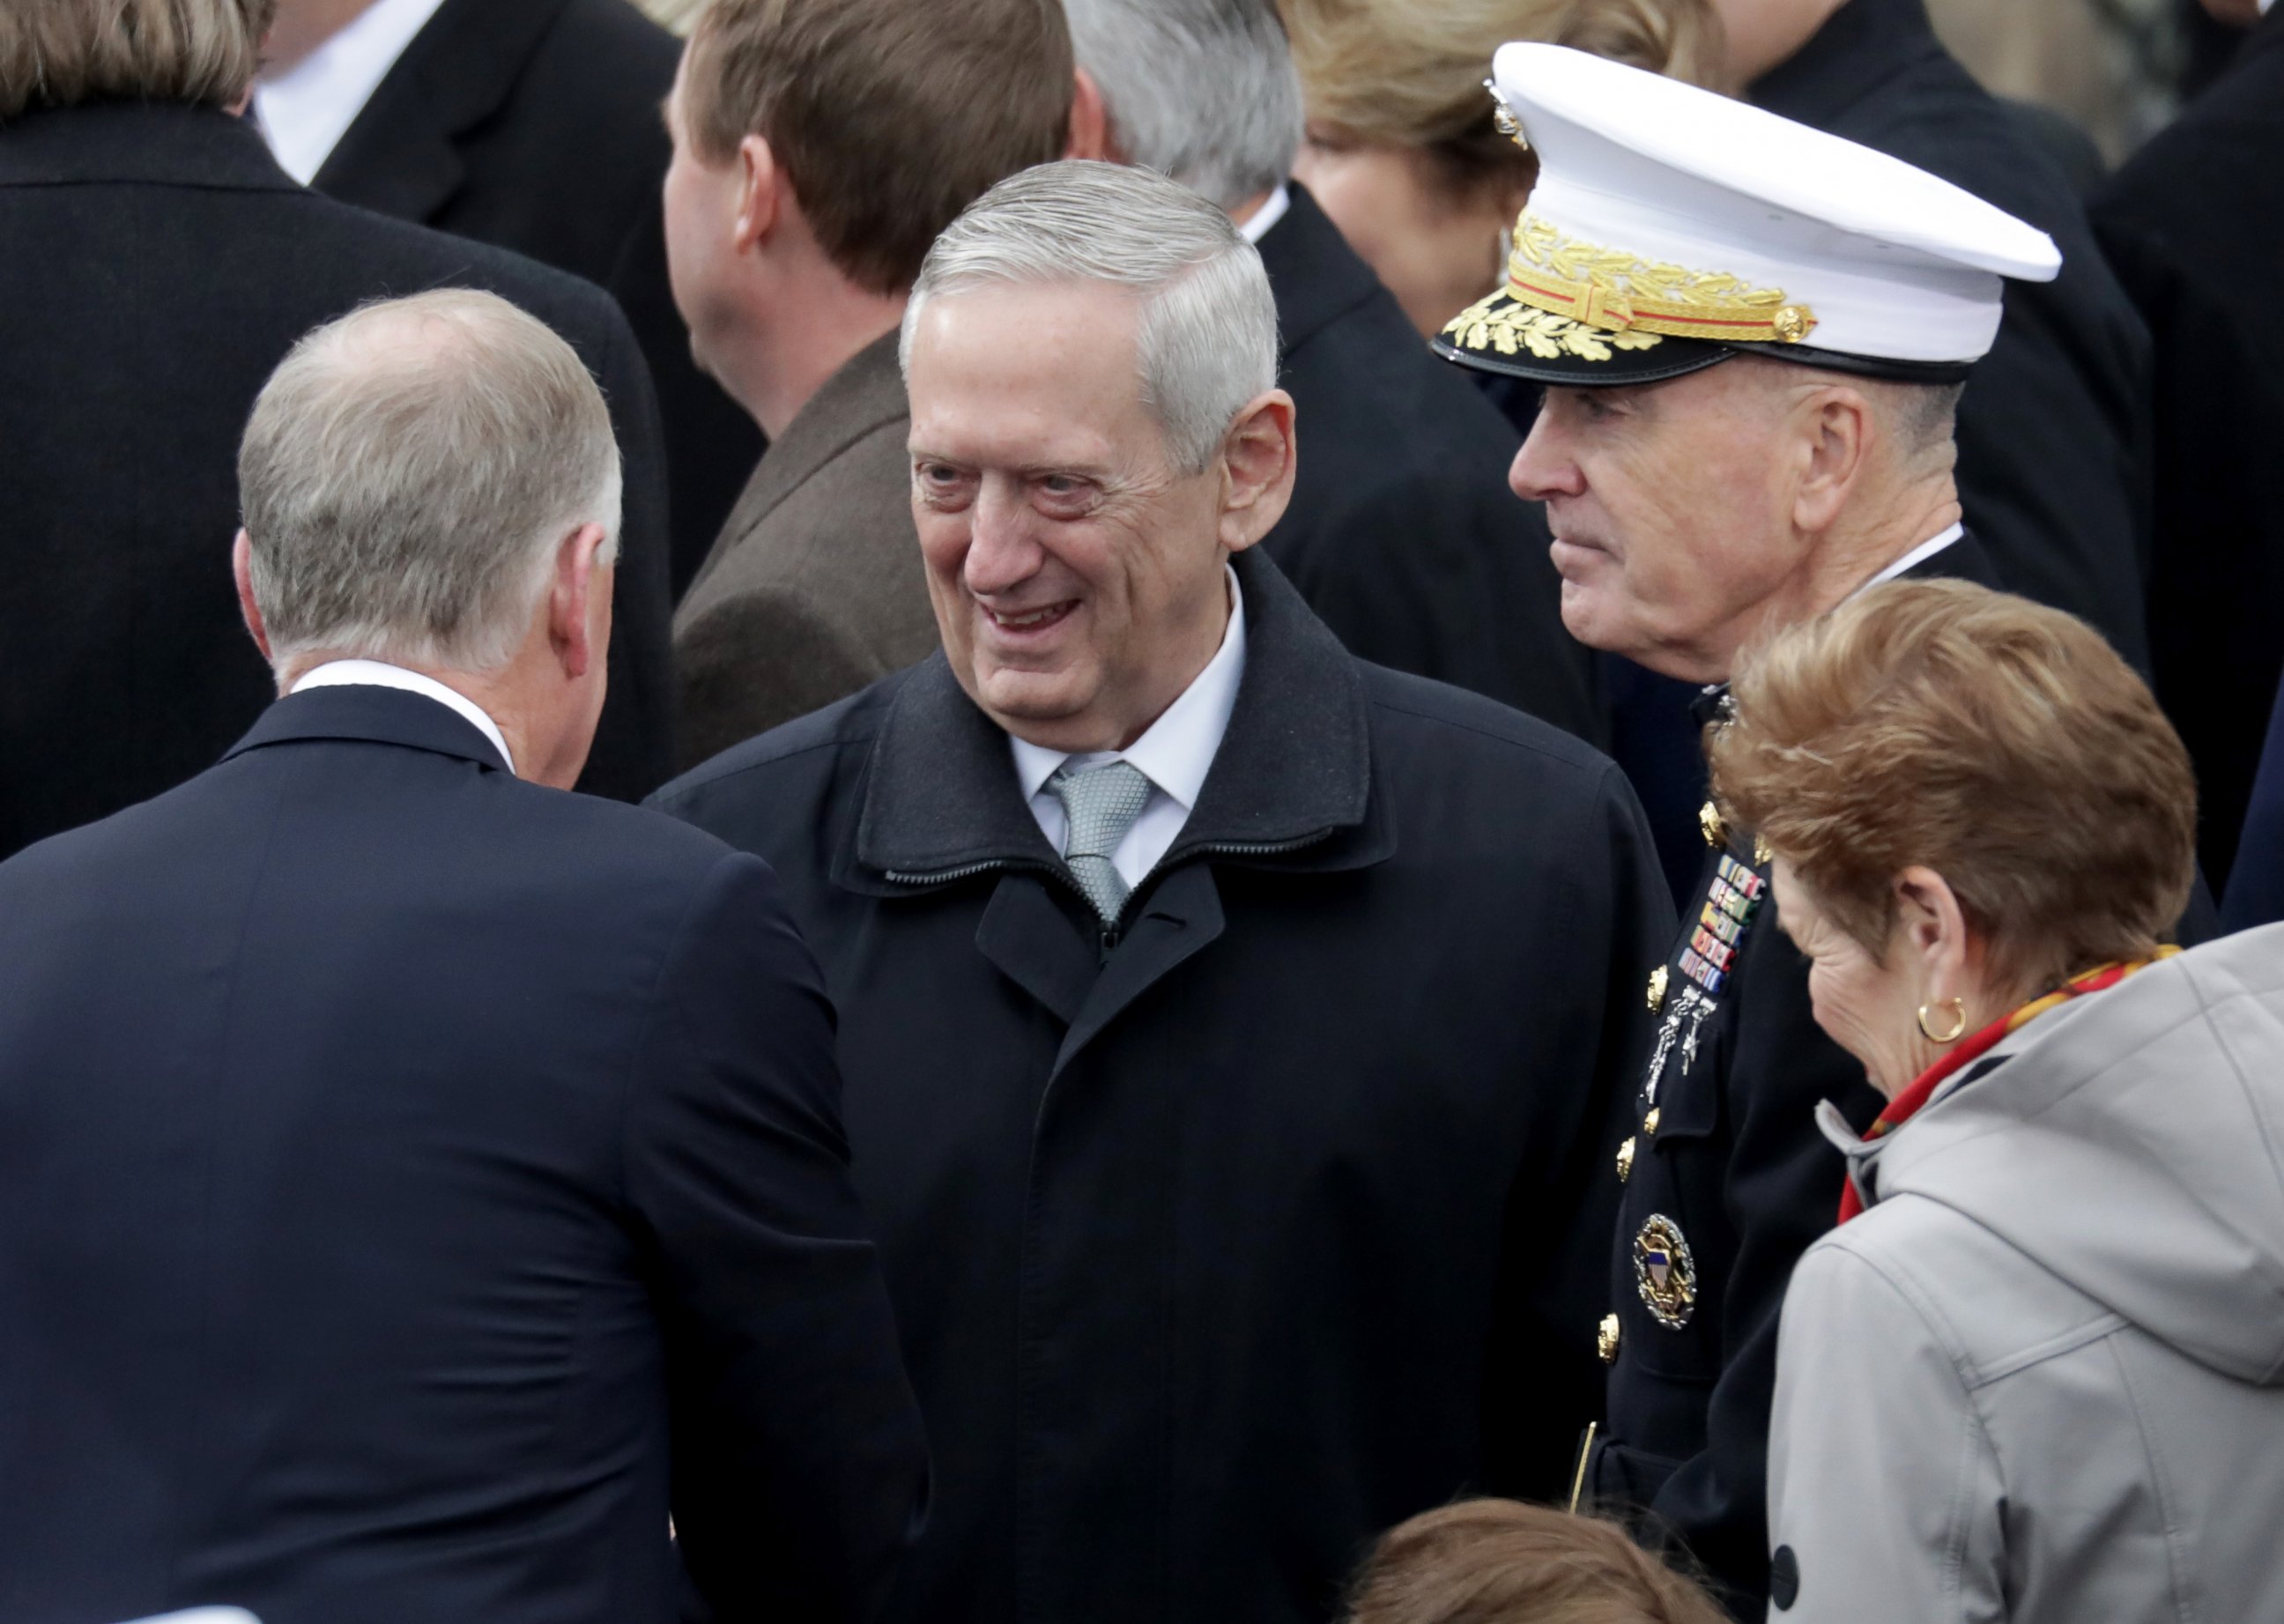 PHOTO: Donald Trump's Defense Secretary Gen. James Mattis (C) arrives on the West Front of the U.S. Capitol on January 20, 2017 in Washington, DC. He was the first Trump Cabinet nominee confirmed by the Senate today, with a 98-1 vote.